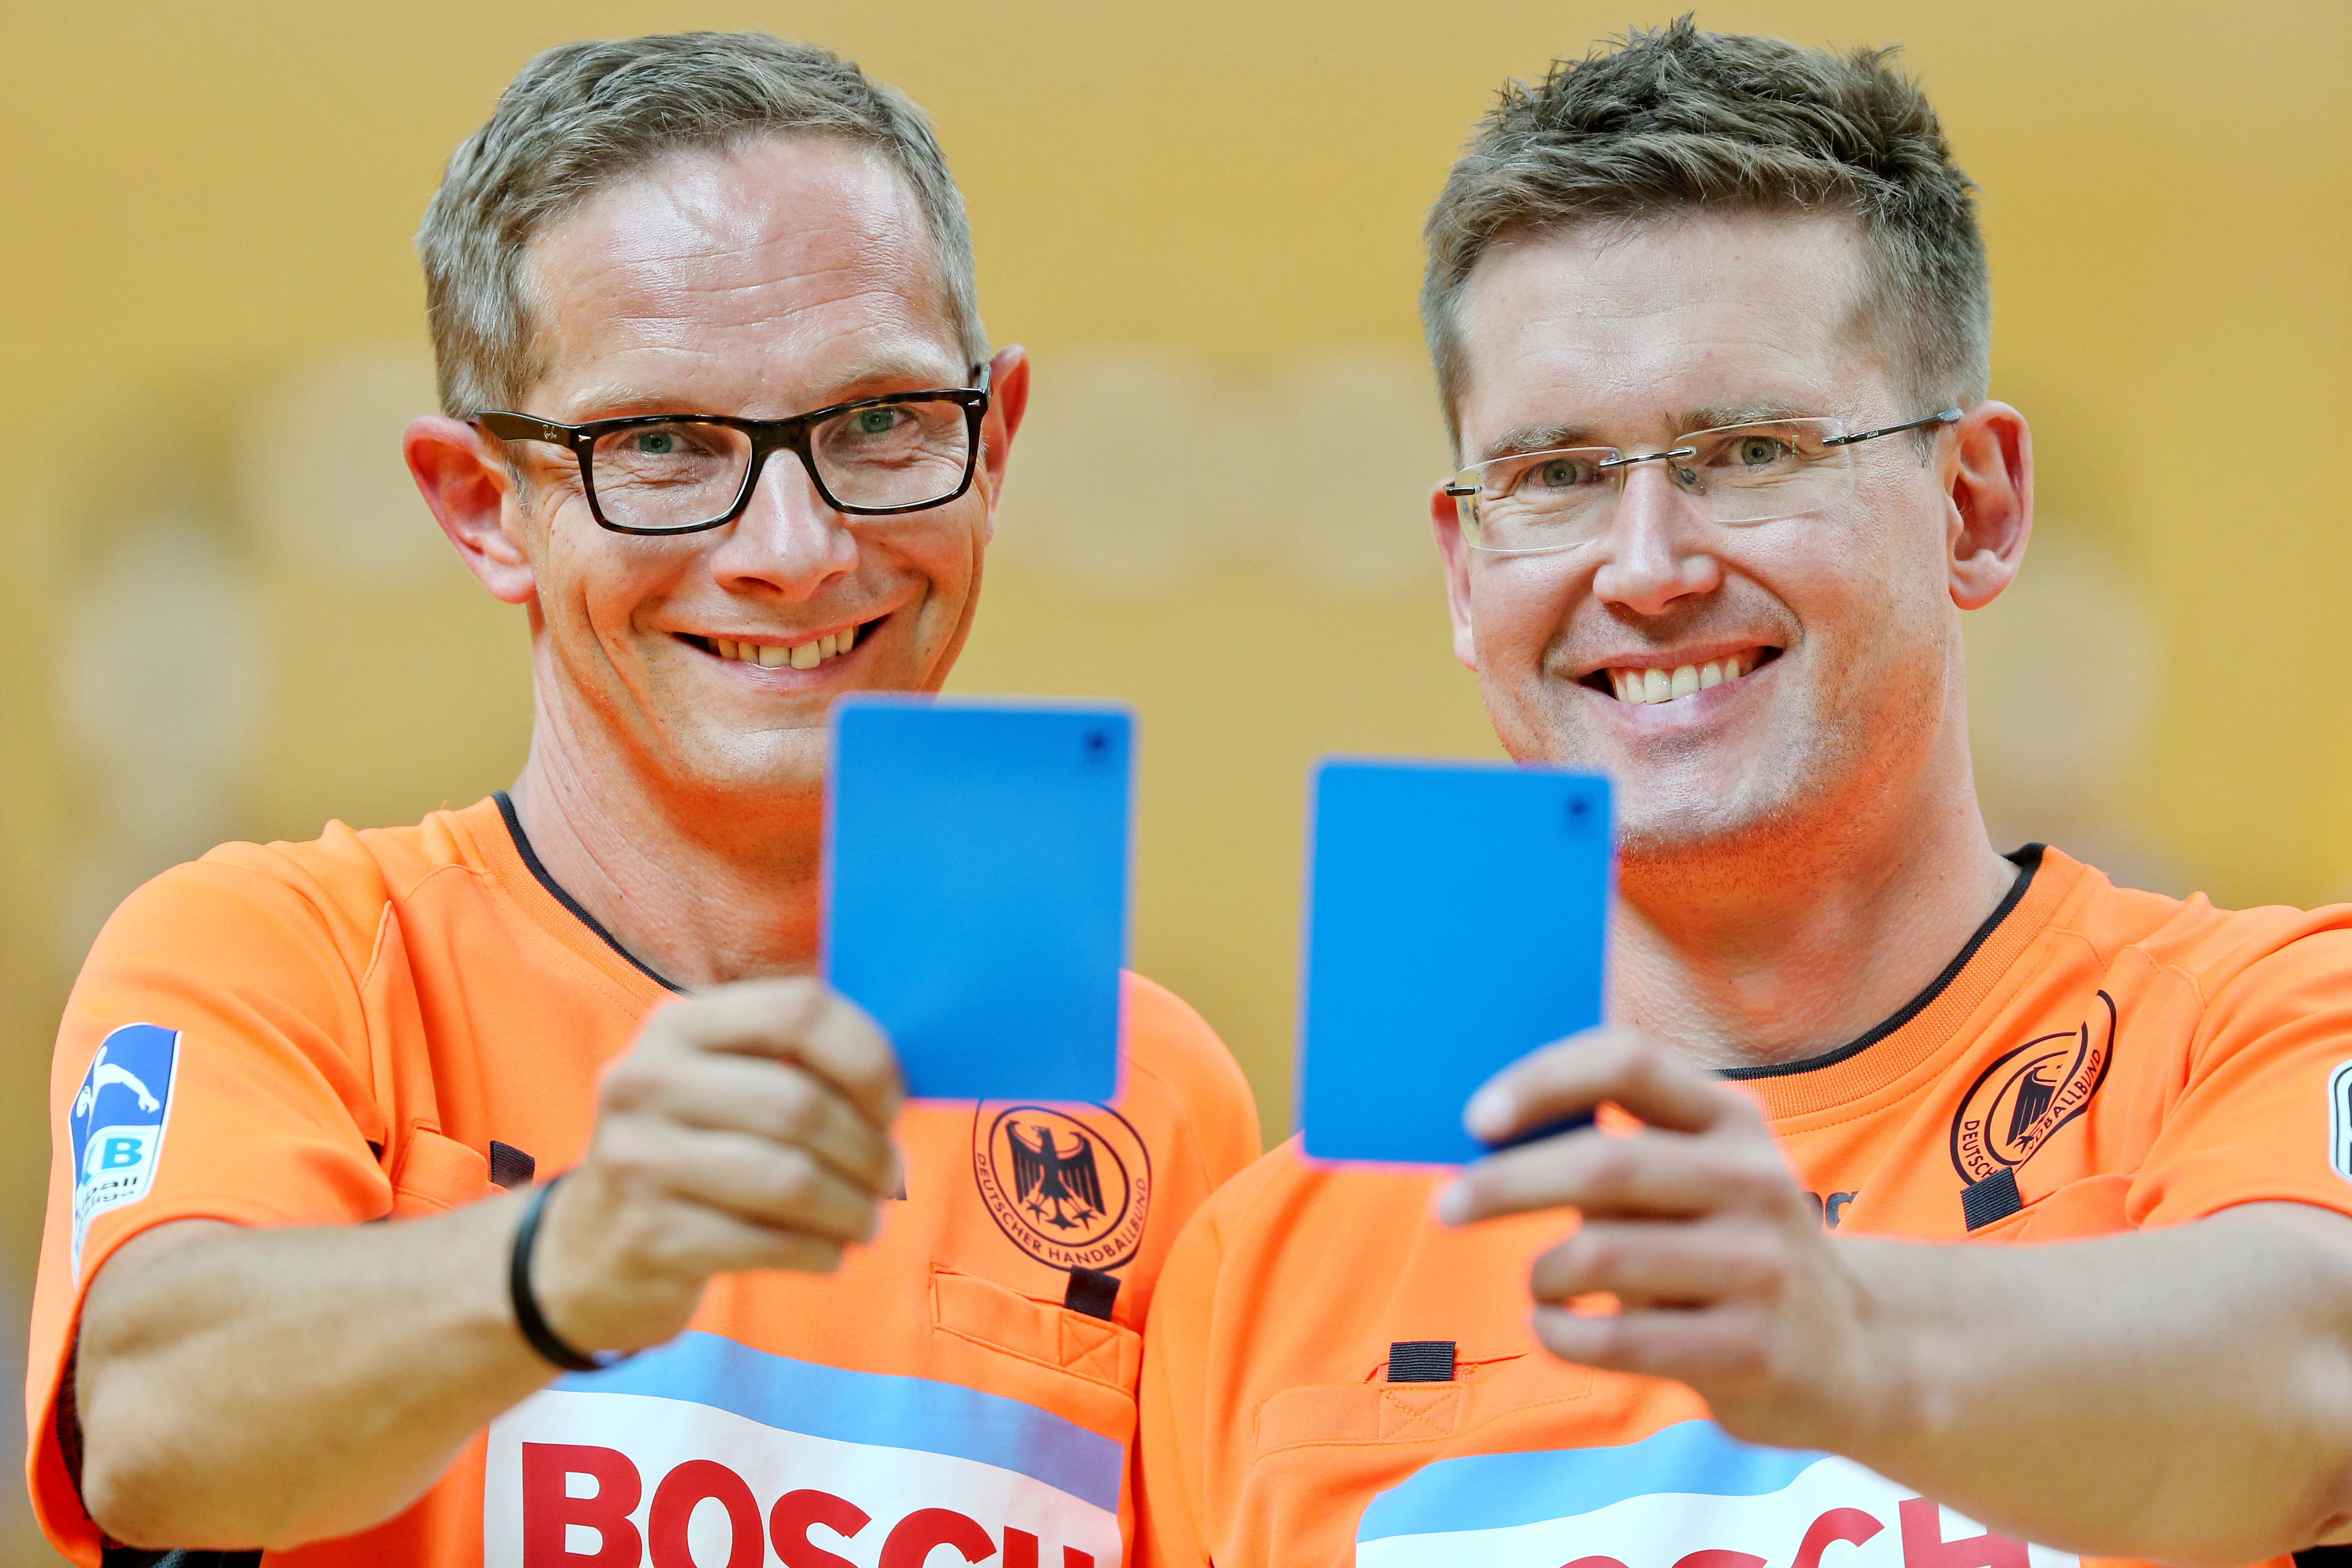 Handball referees Geipel and Helbig go to Olympics for 2nd time